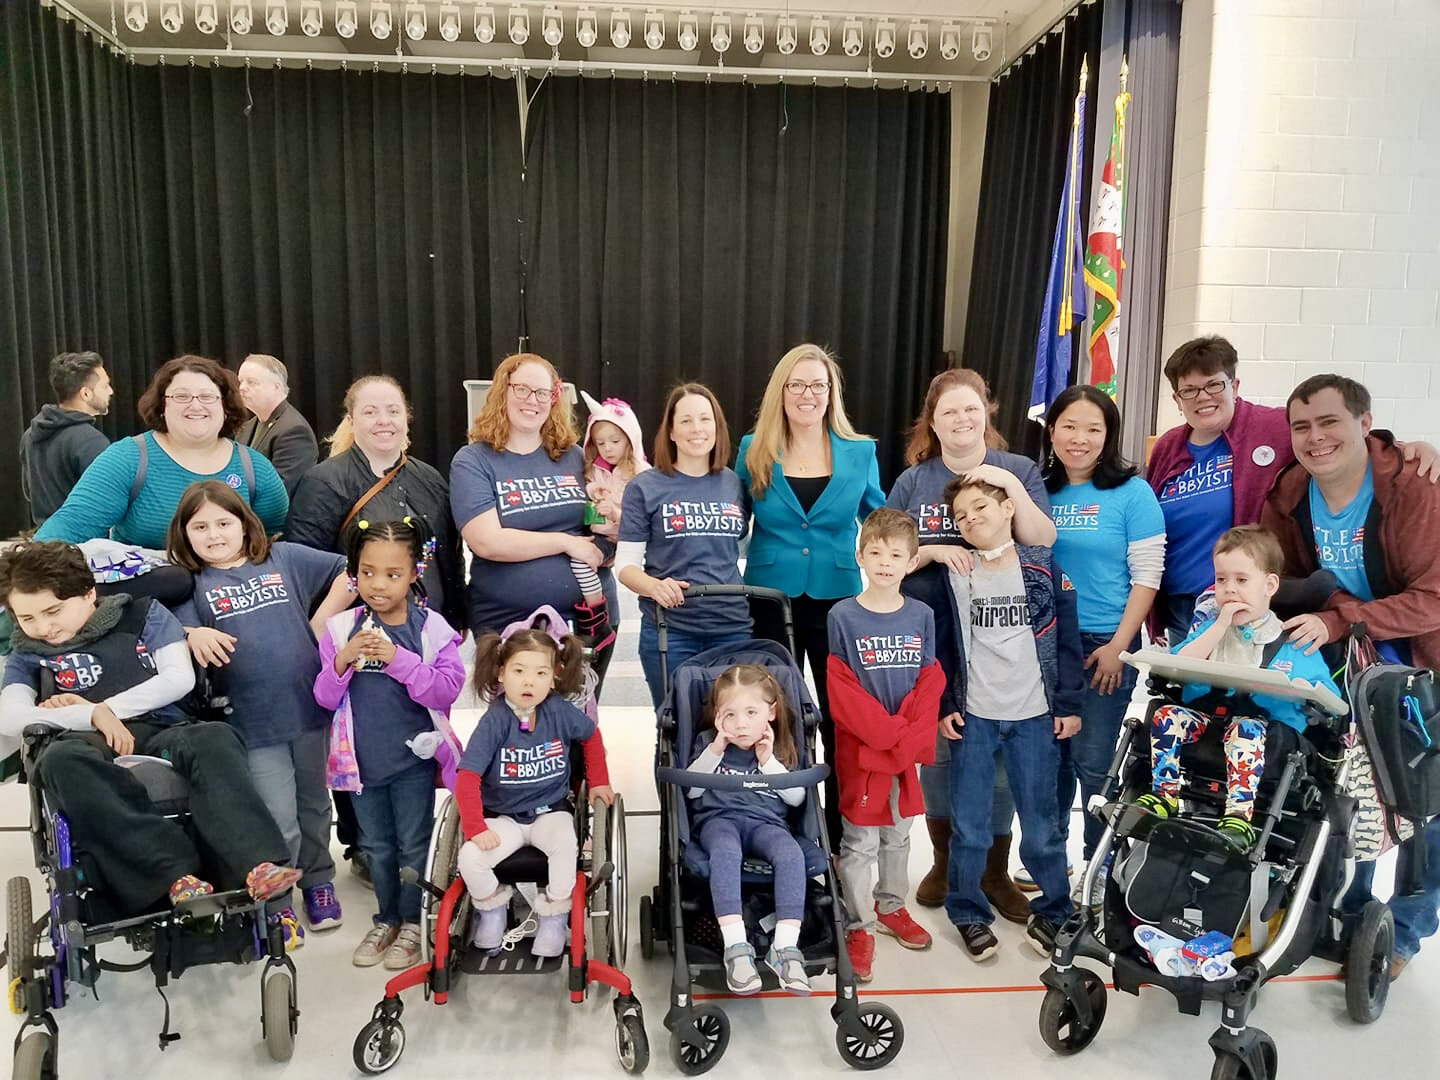  A large group of Little Lobbyists poses with a member of. Congress in front of curtains. 